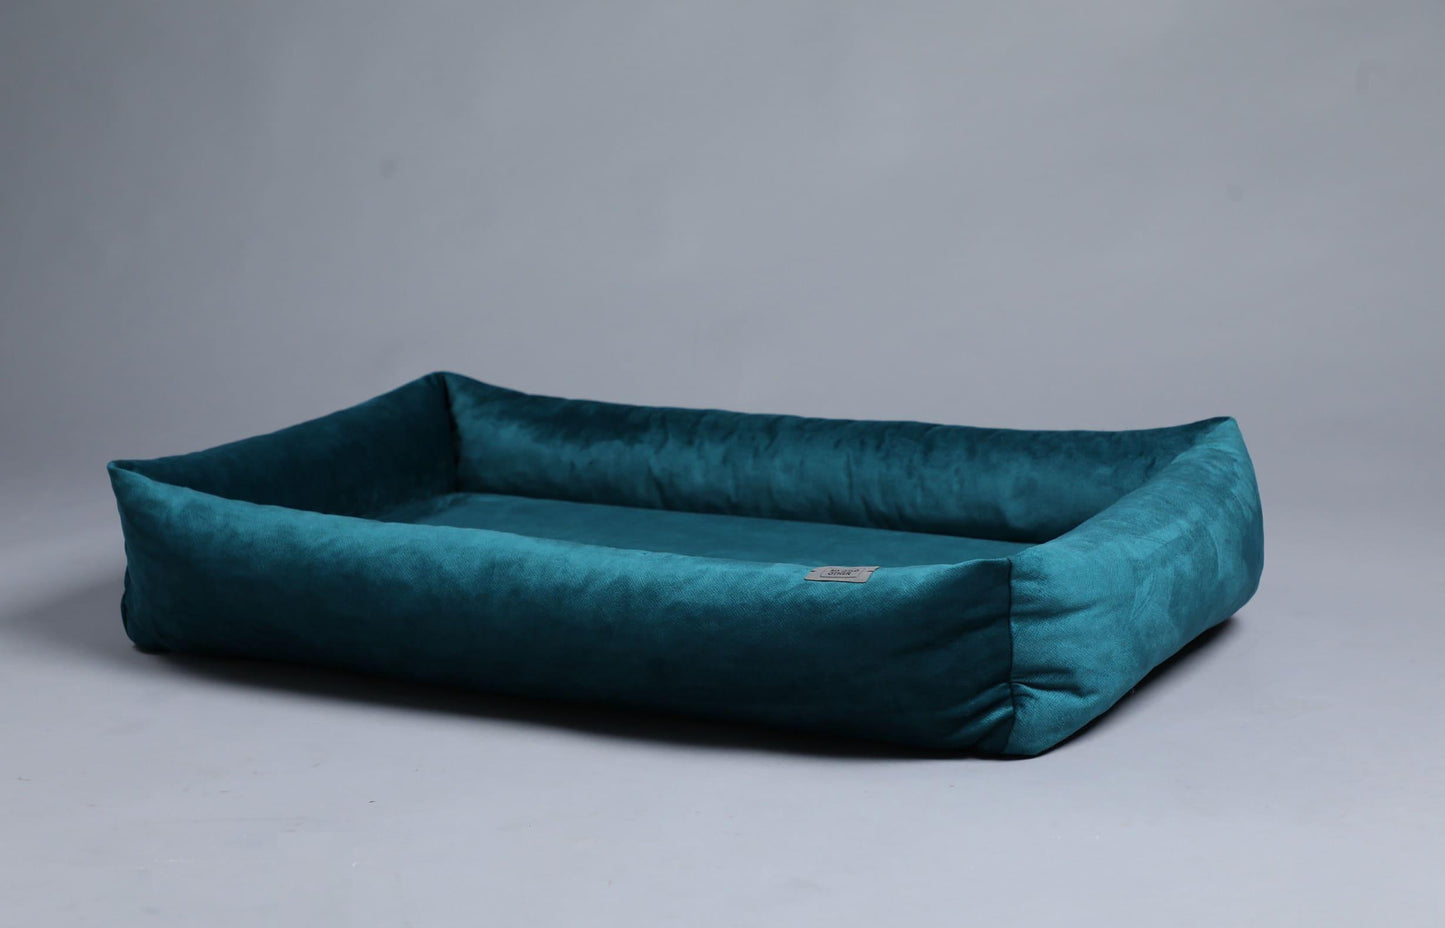 Premium dog bed with sides | 2-sided | OCEAN BLUE - premium dog goods handmade in Europe by My Wild Other